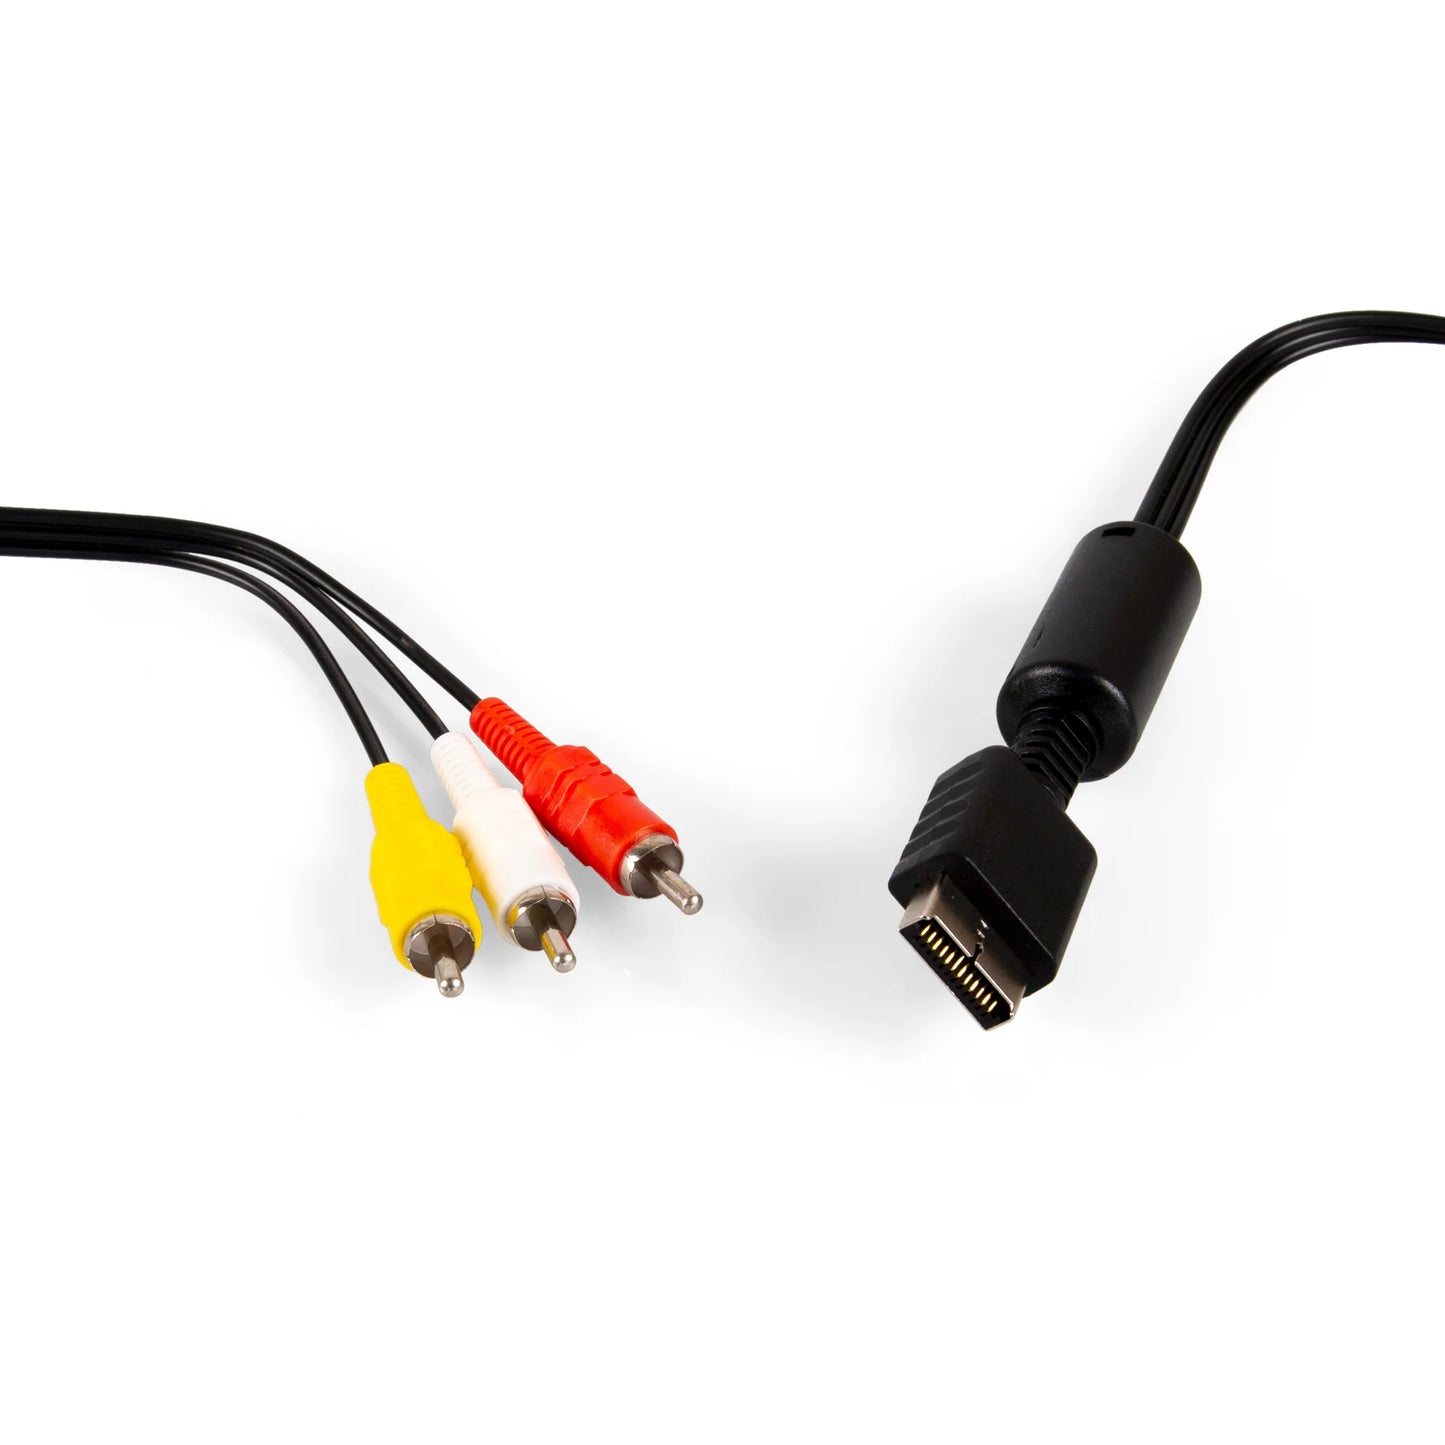 AV Composite Cable (Sony PS1 / PS2 / PS3)